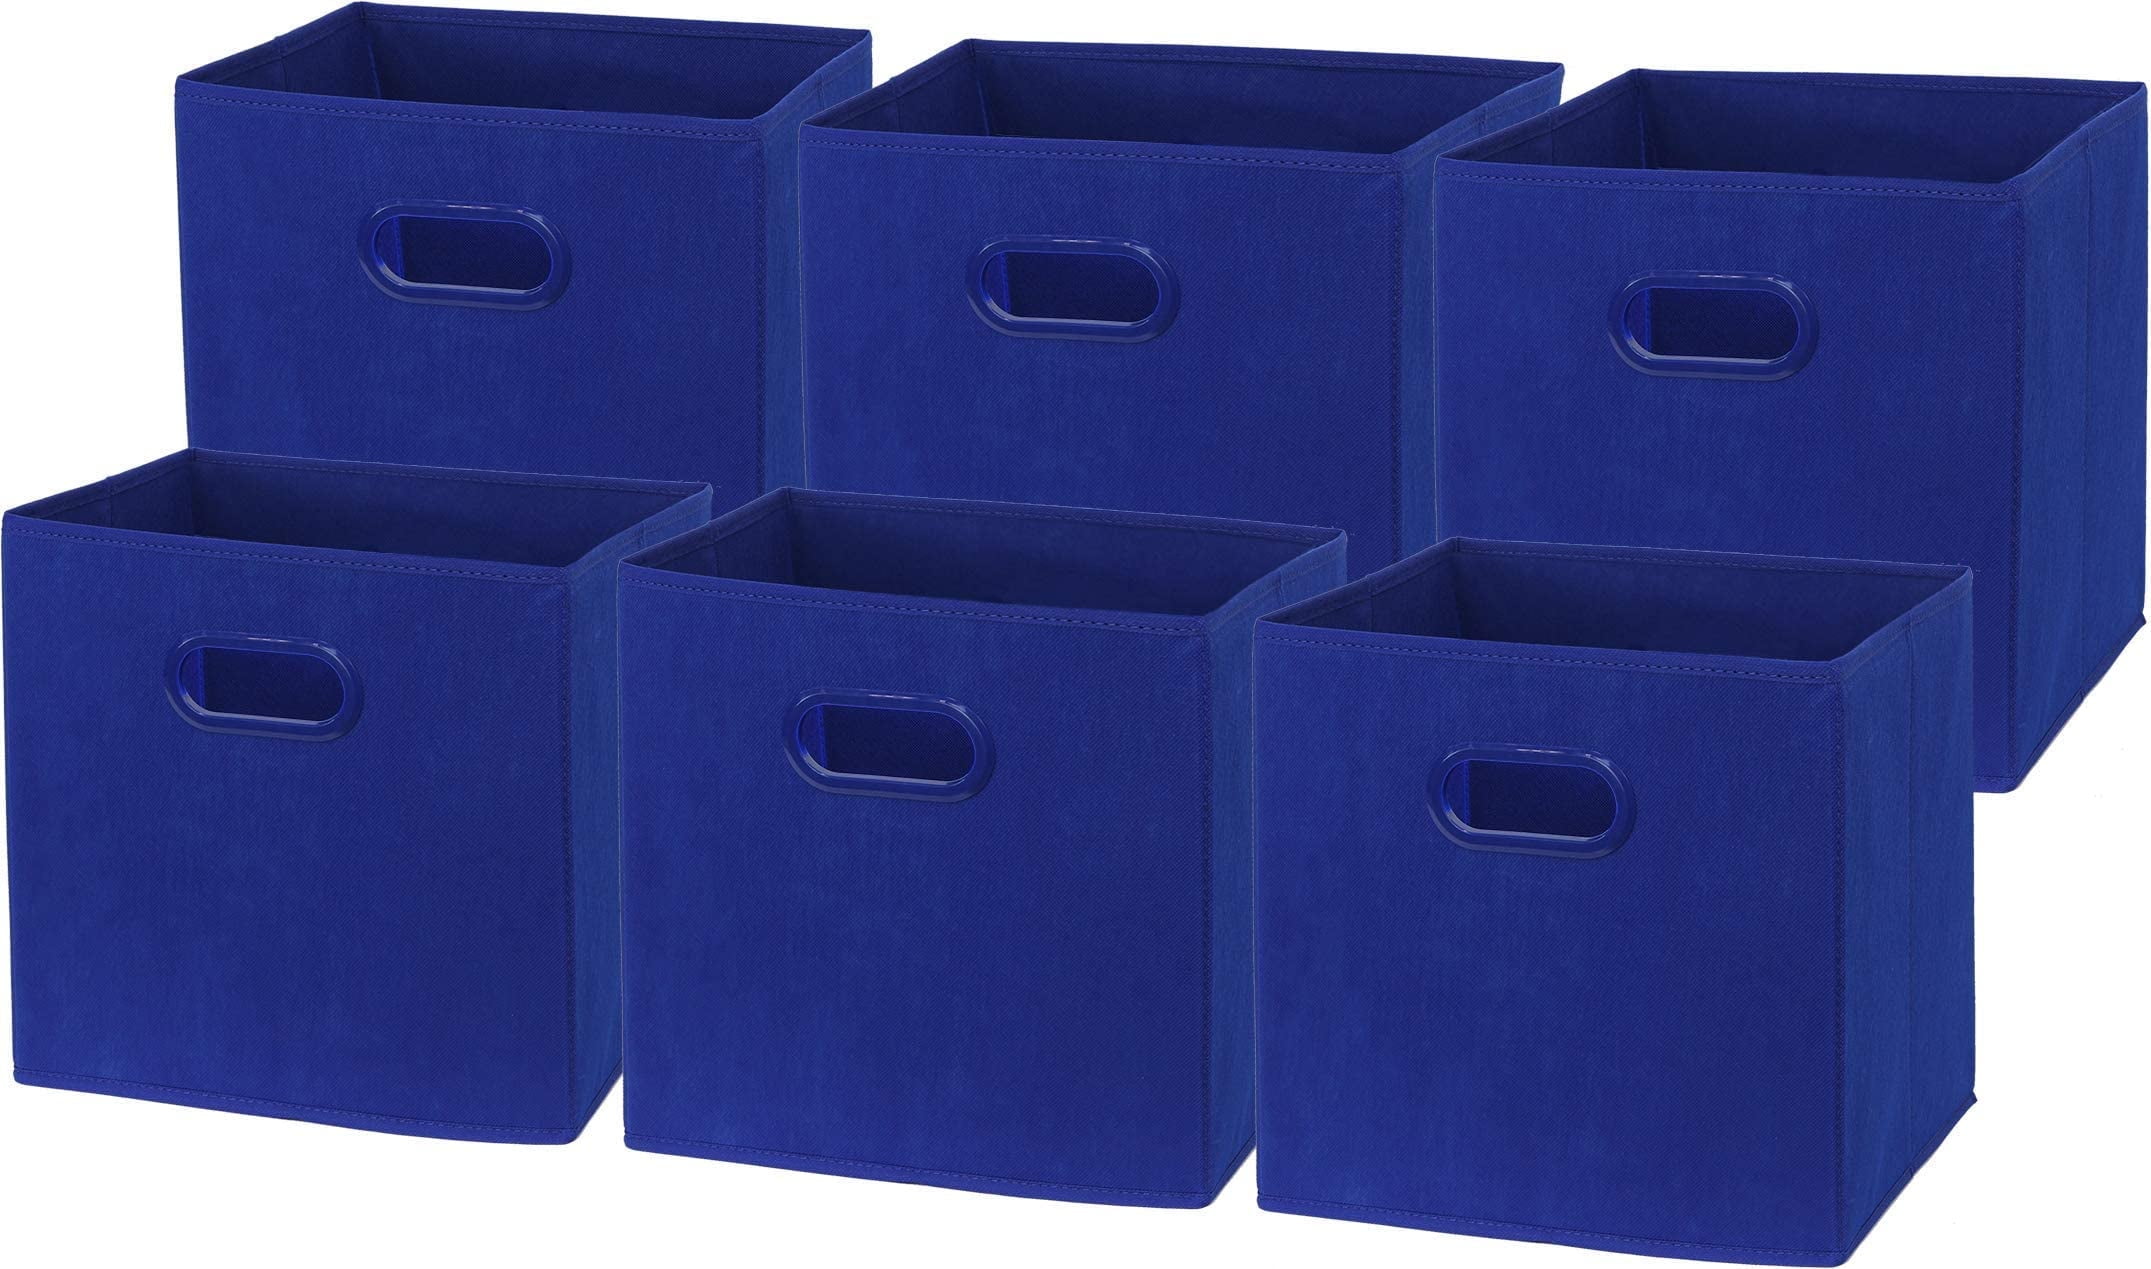 Dropship Fabric Storage Cubes With Handle, Foldable Cube Storage